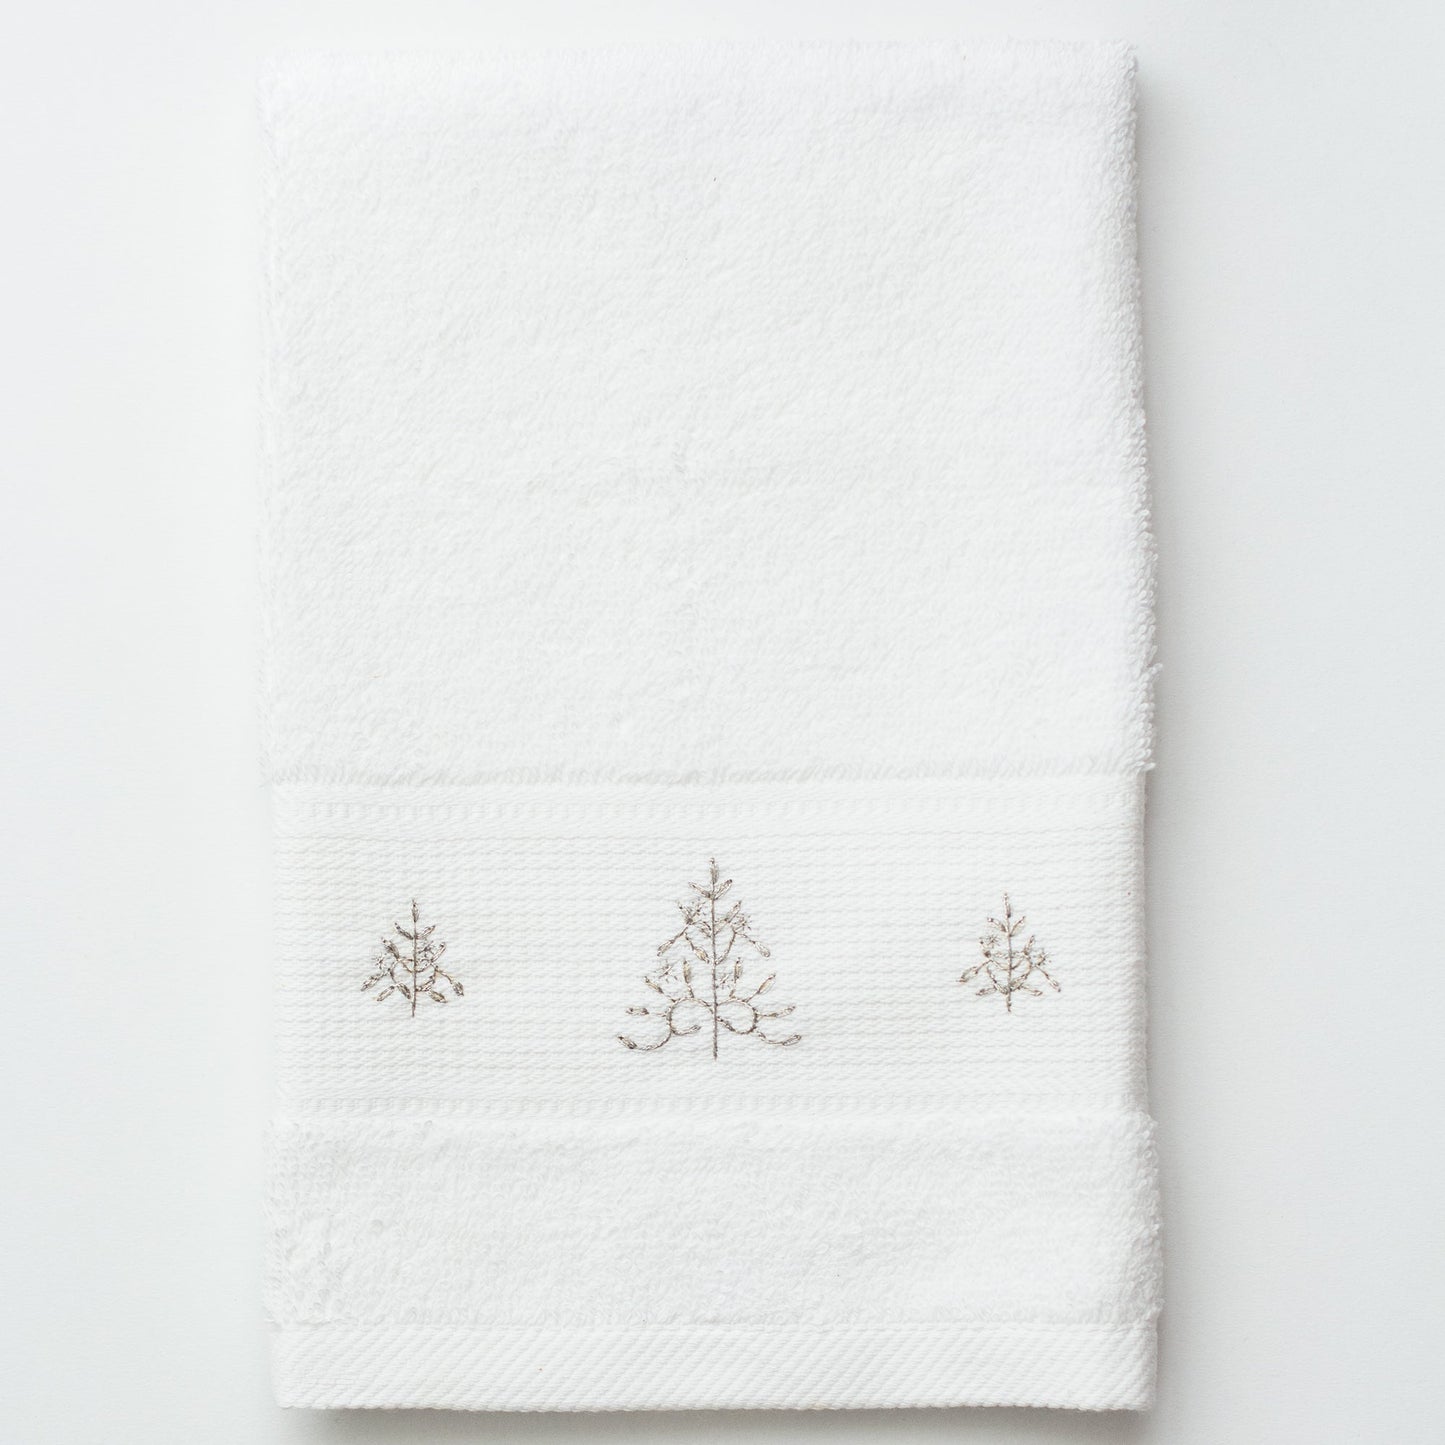 A white terry towel. 3 glittering silver christmas trees are embroiderevd in the center